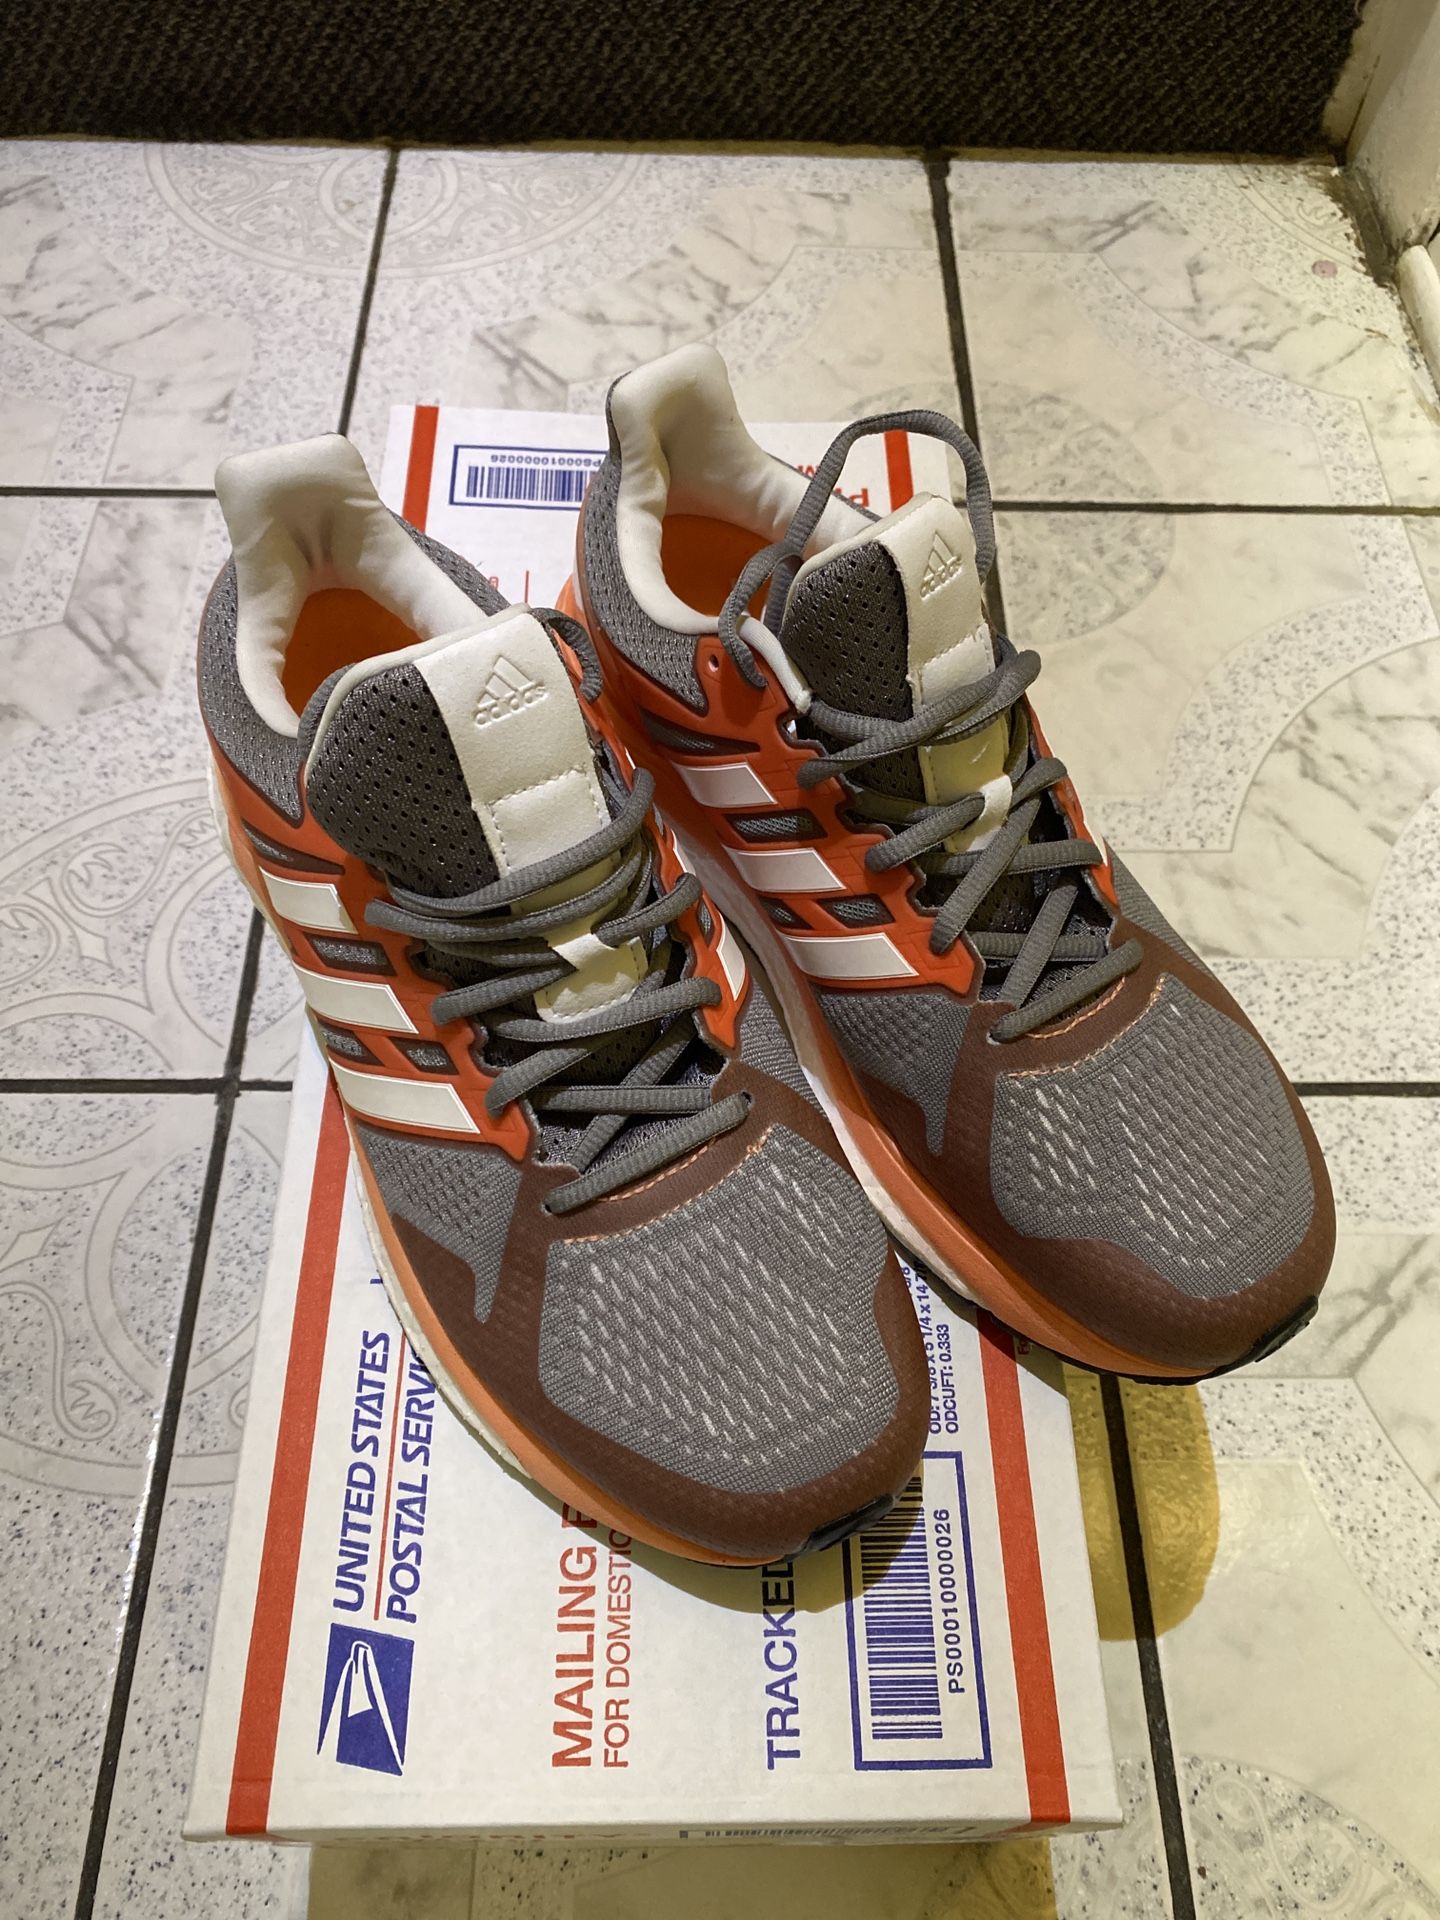 New Adidas Supernova St Womens Running Boost Sneakers Shoes Size 9 DB0911 Grey